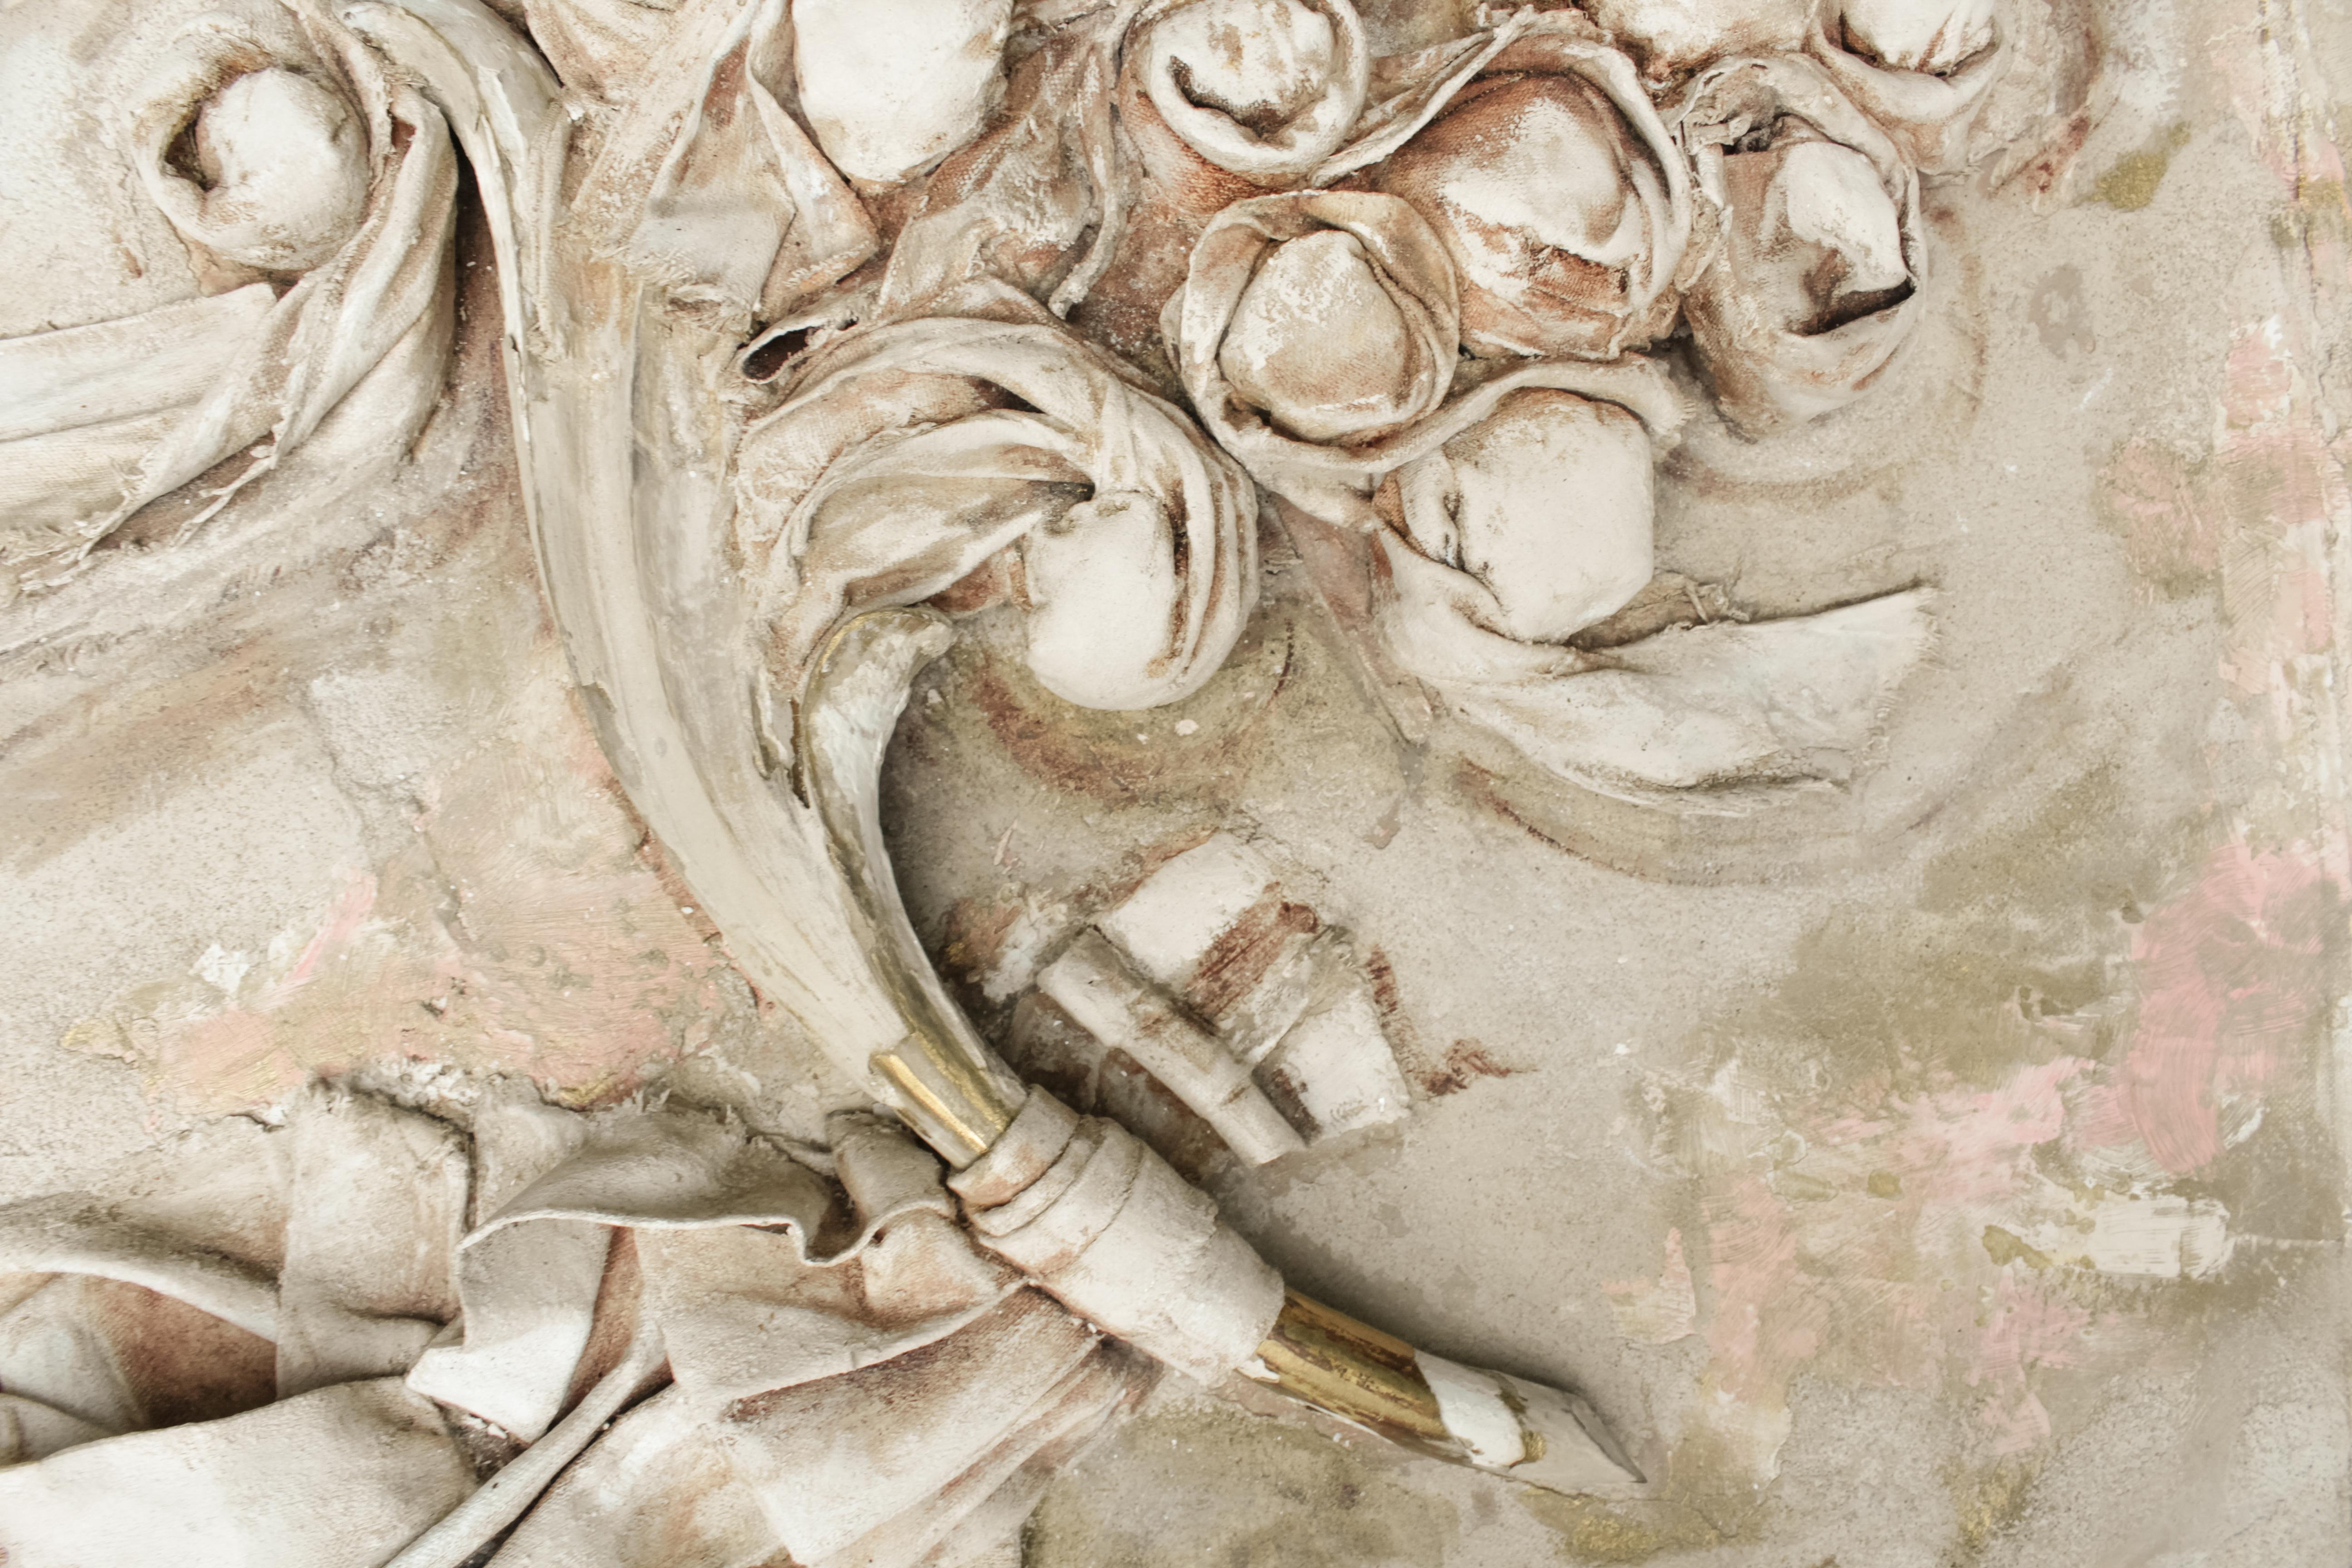 American Flower Bouquet Relief Sculpture with 18th Century Italian Fragments For Sale